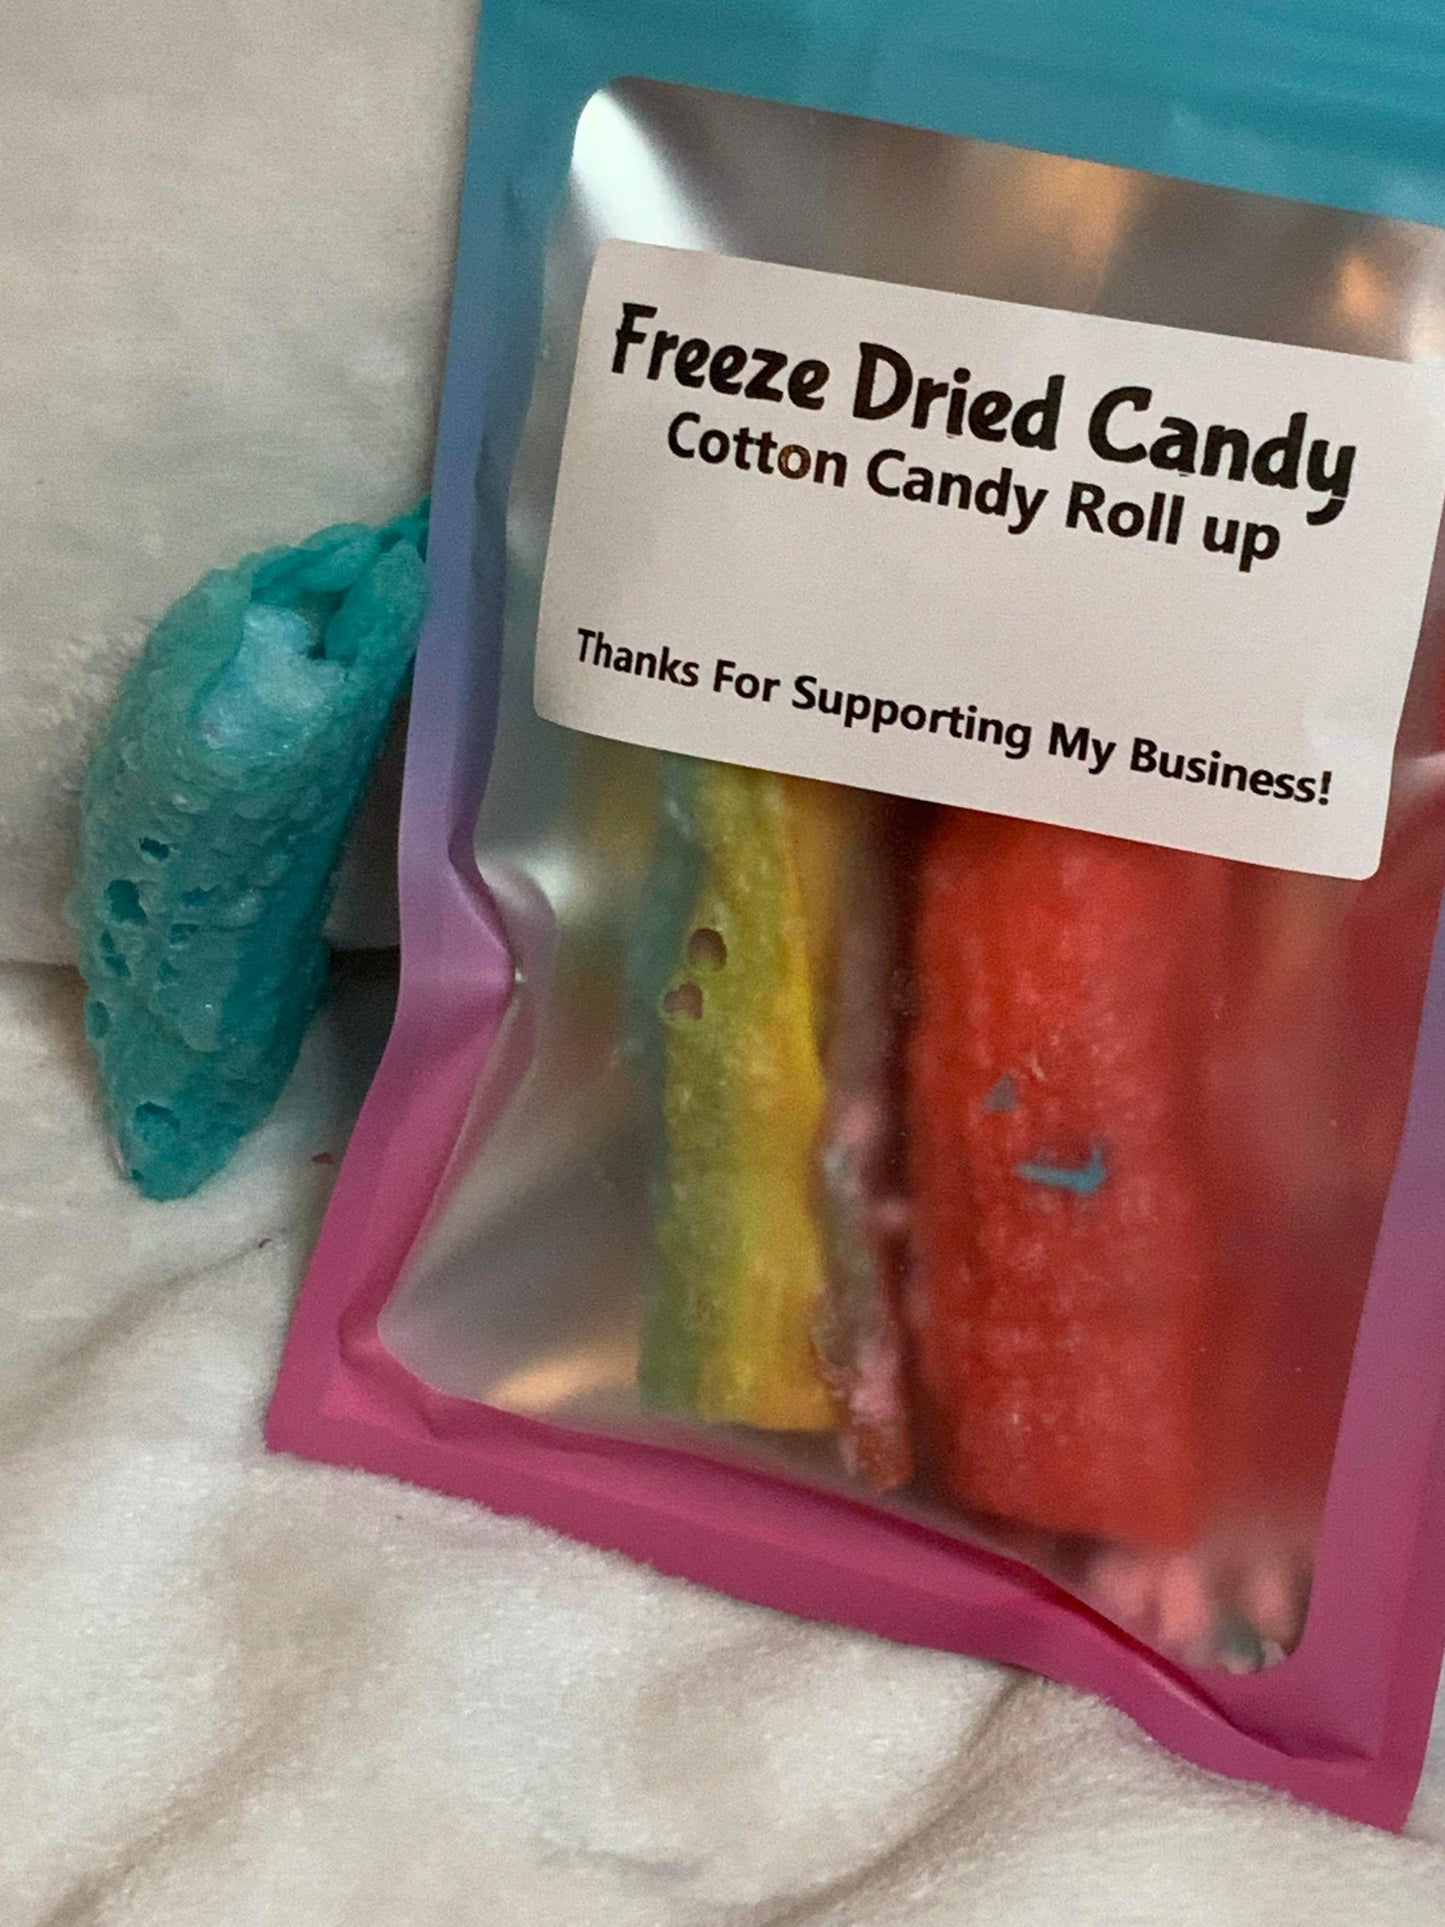 FREEZE DRIED COTTON CANDY ROLL UP